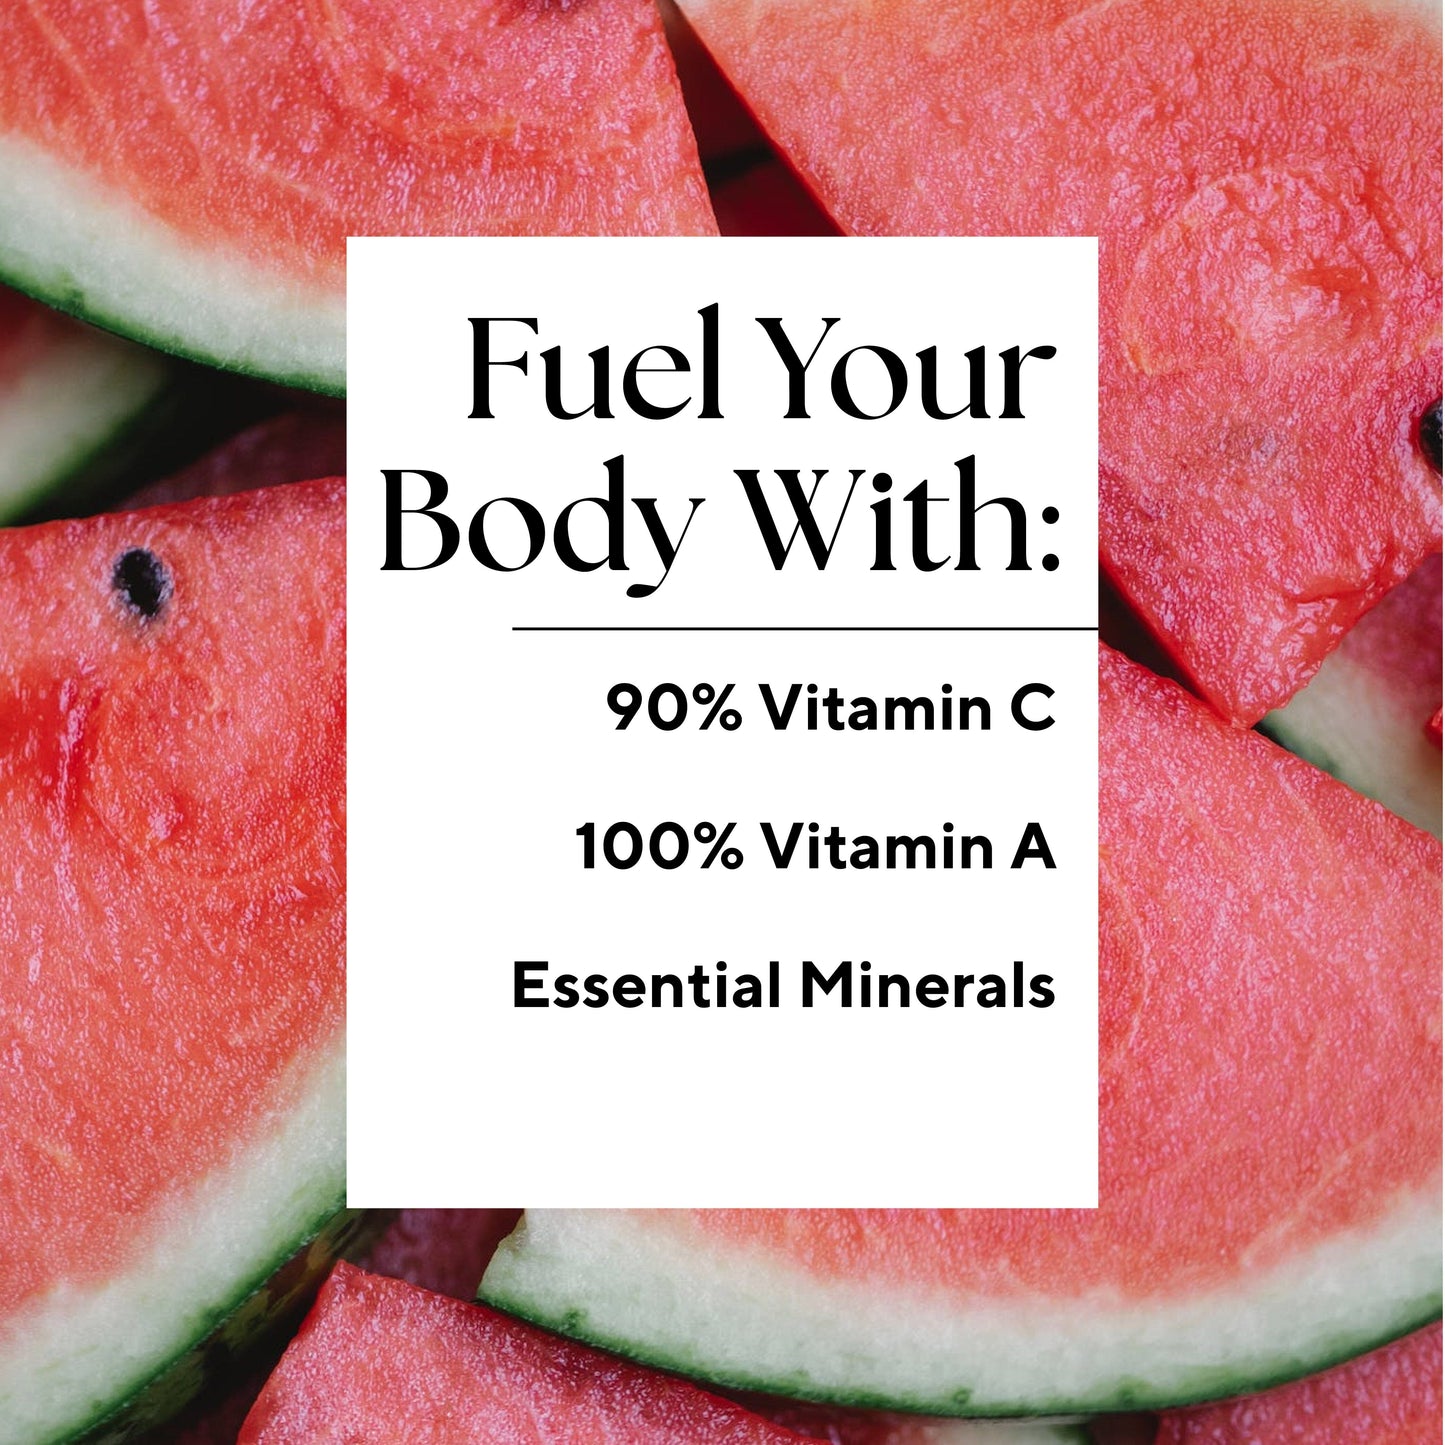 Infographic that reads: "Fuel your body with: 90% Vitamin C, 100% Vitamin A, and Essential Minerals"